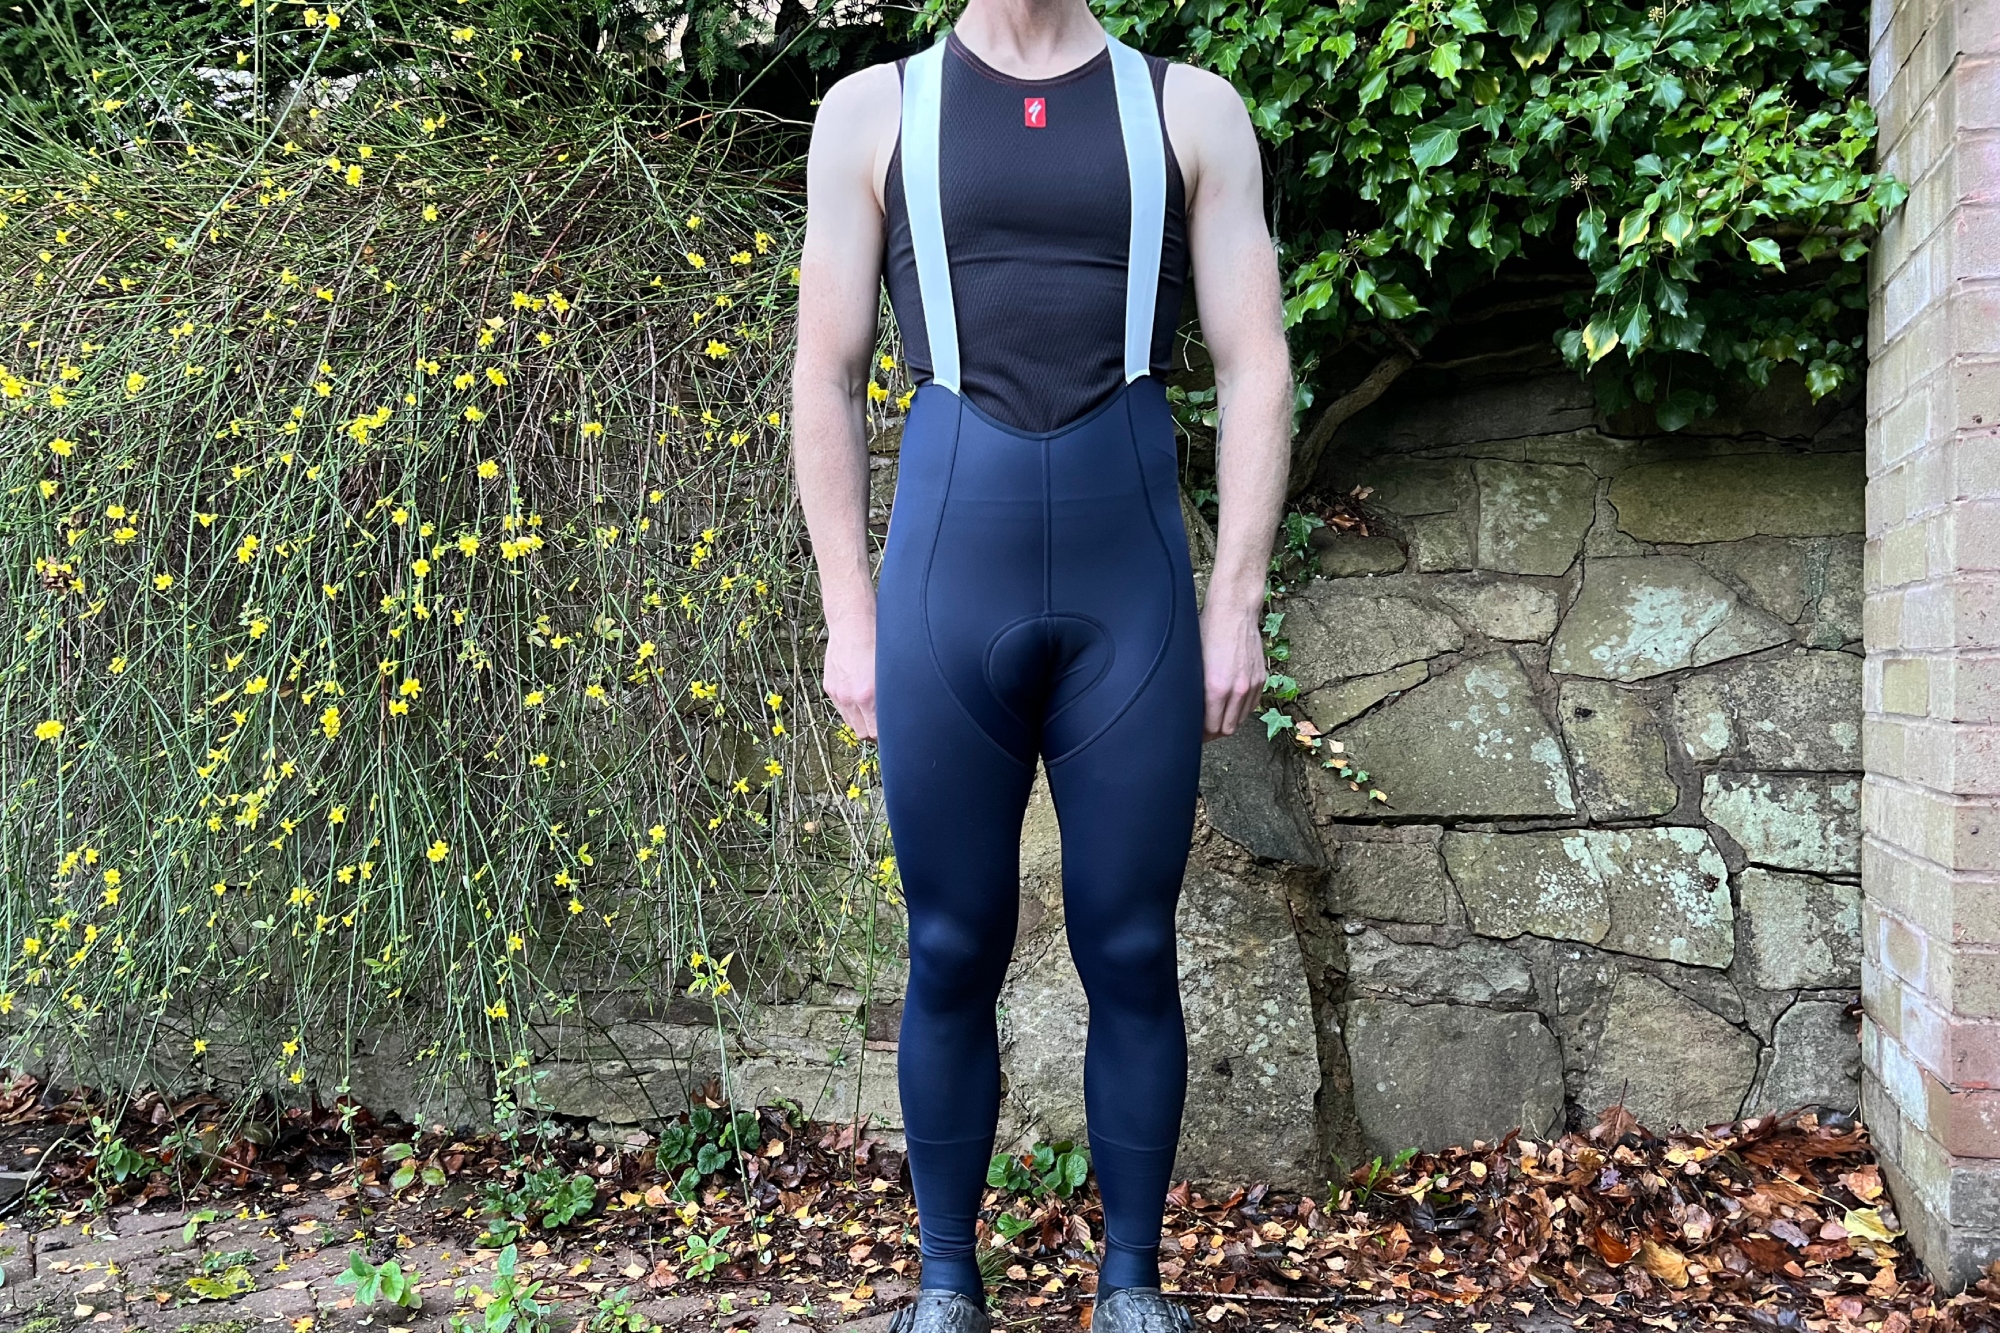 Men's Pro Team Training Tights with Pad